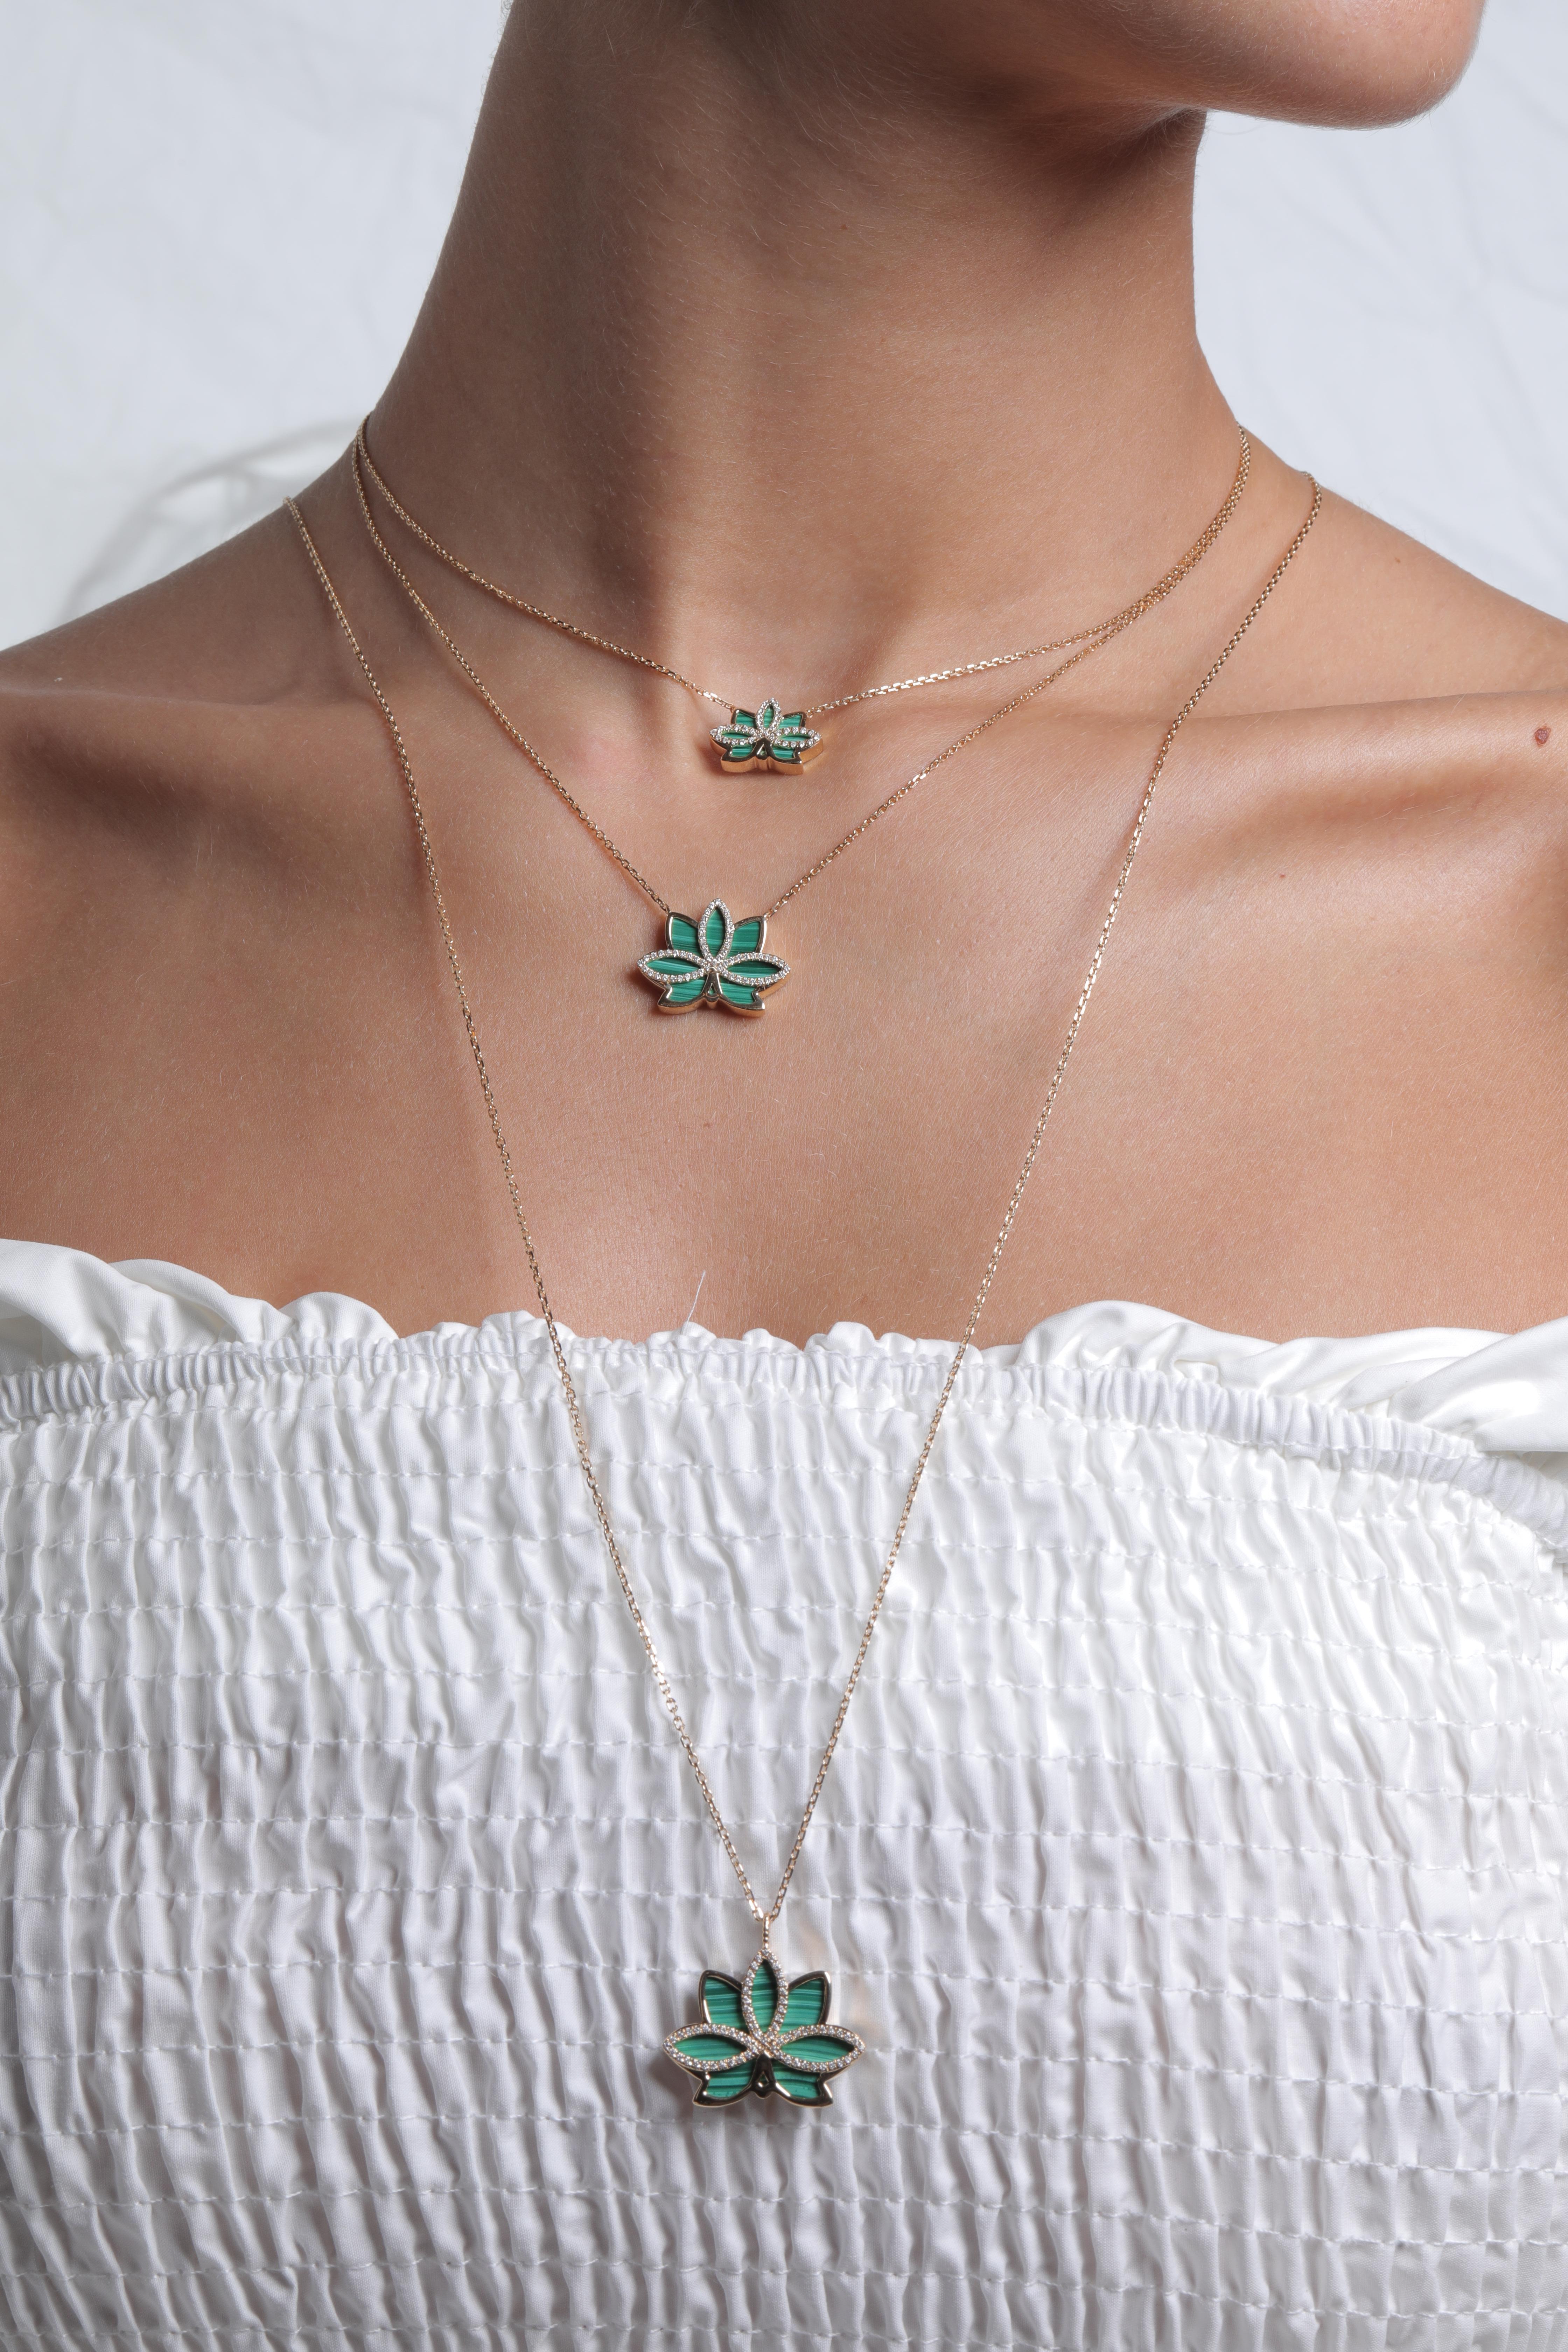 This is a beautiful Malachite necklace with an elegant long gold chain. Smooth, this gemstone will rest nicely on your neck, giving both color and a calming presence. This Necklace is perfect for just about any occasion!

Made from 18k gold,